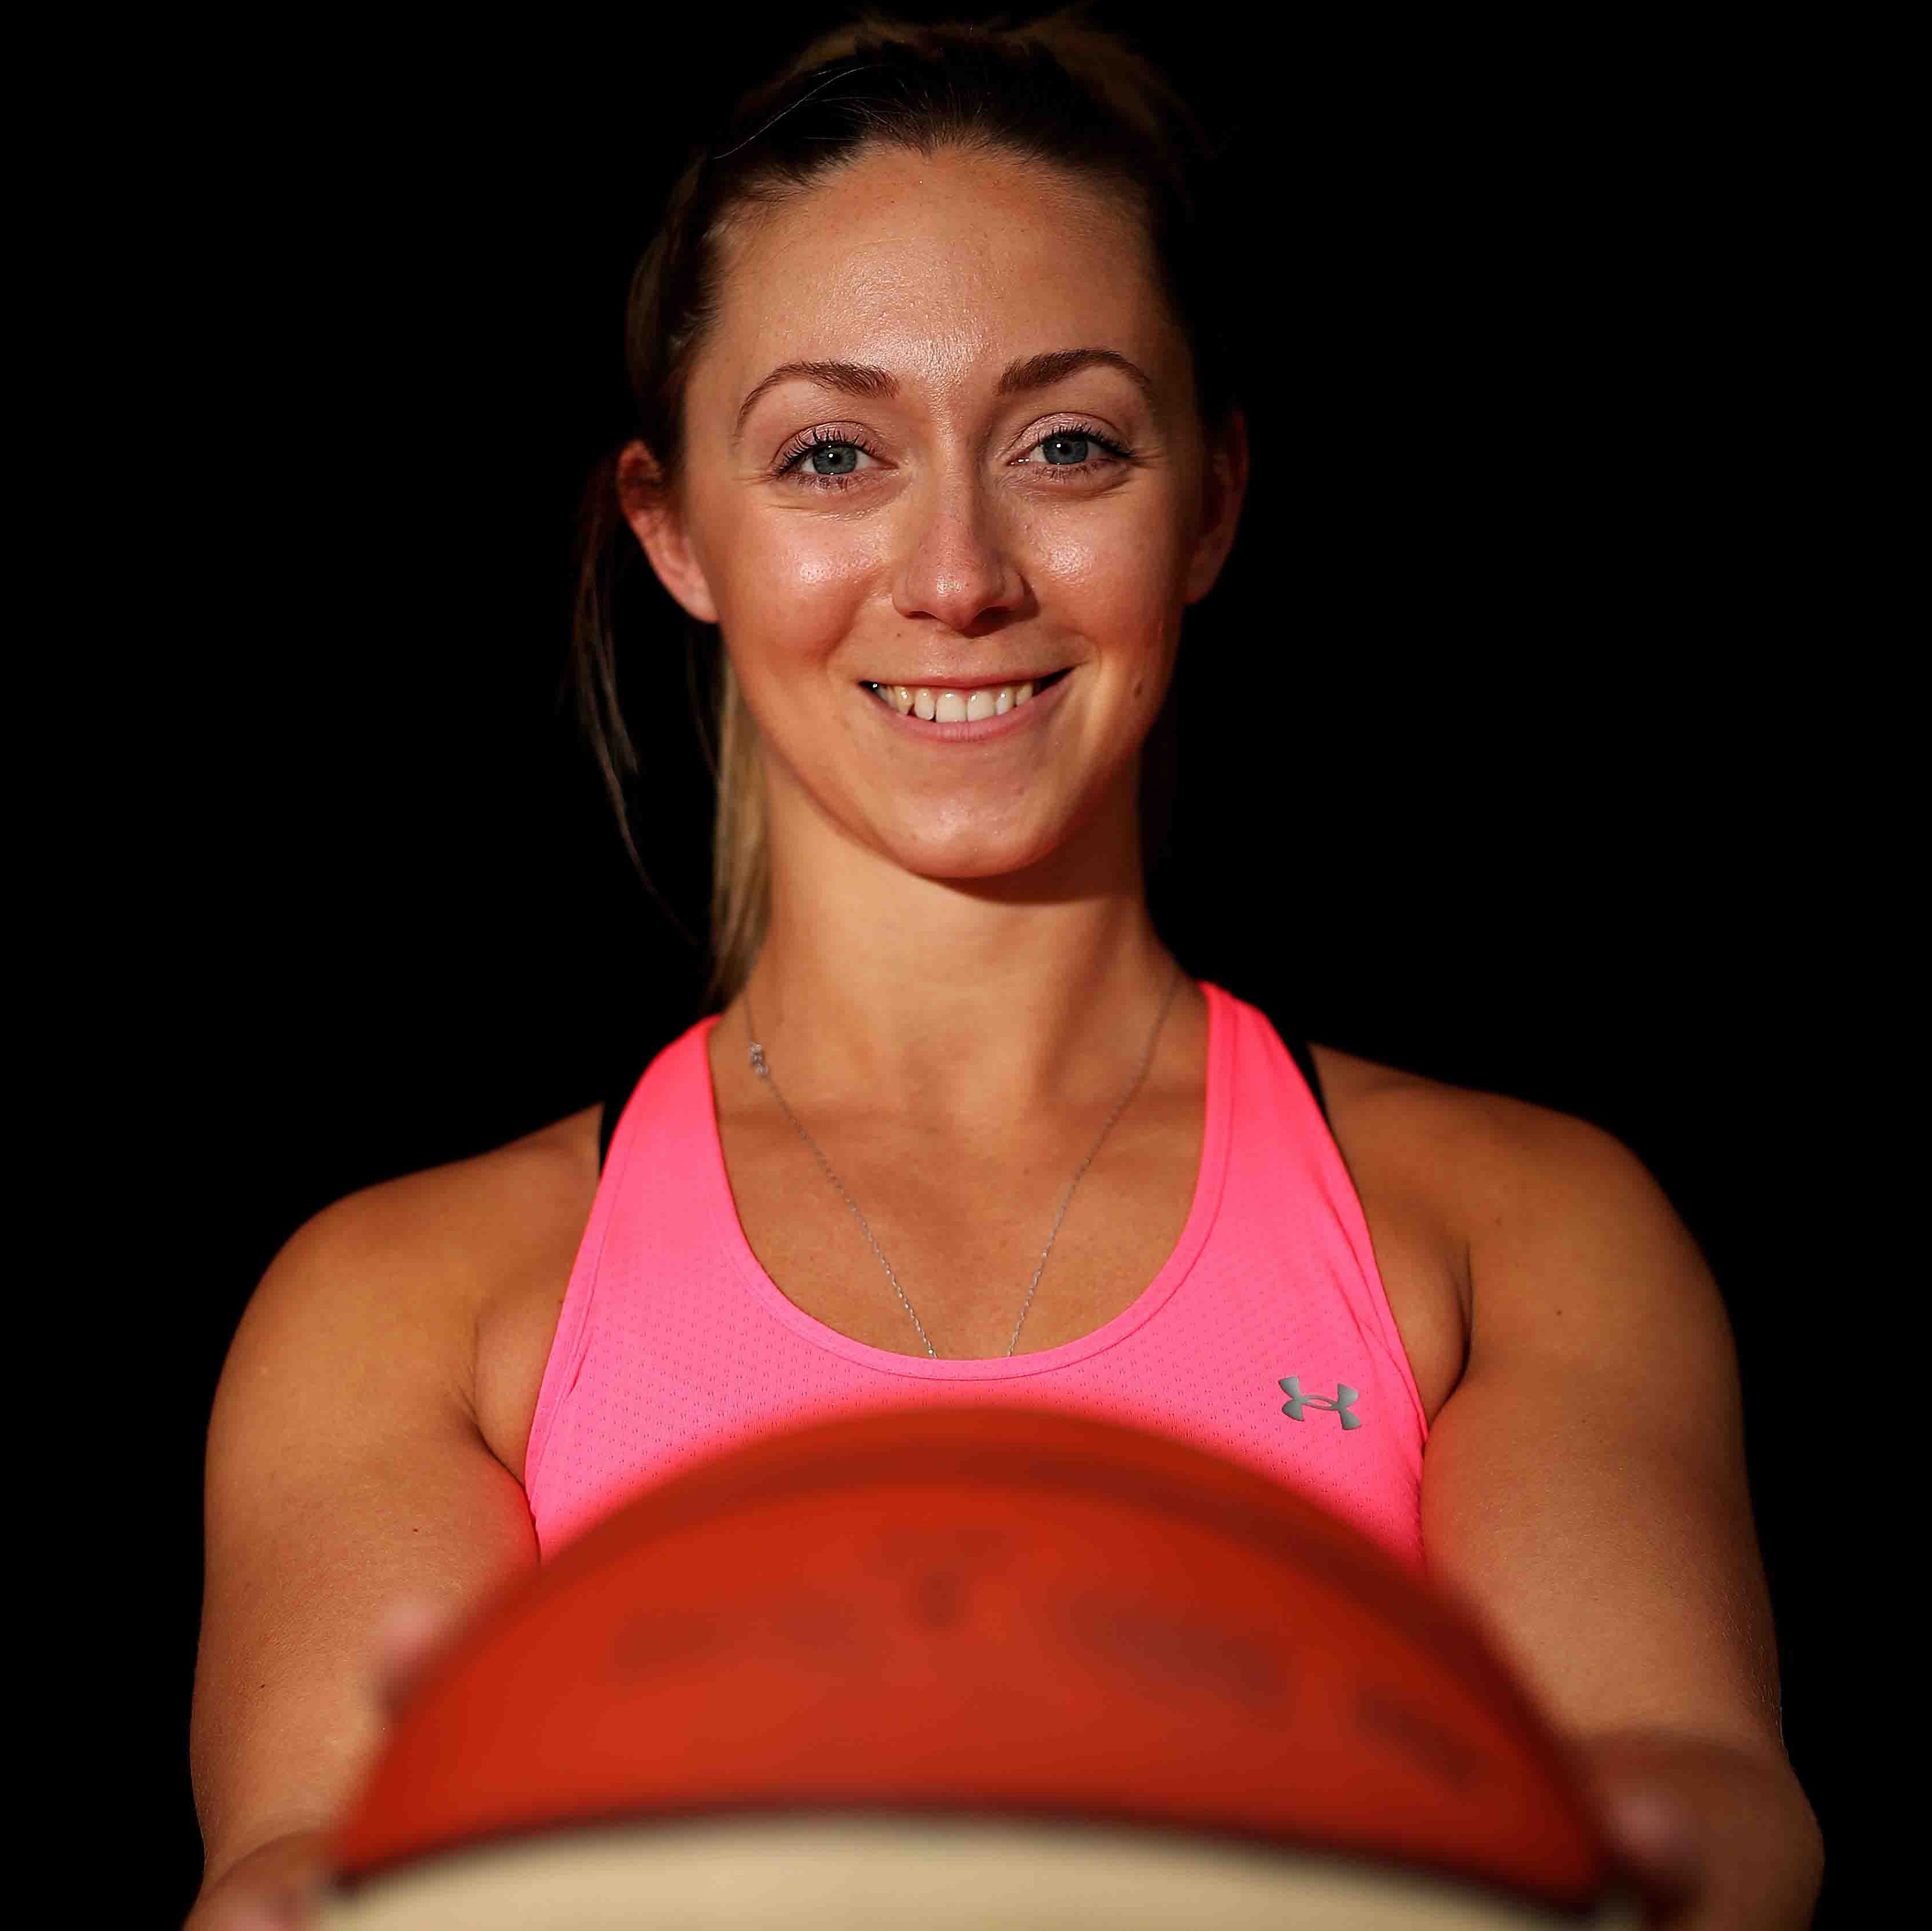 Sophie, smiling and holding a basketball at arms length.